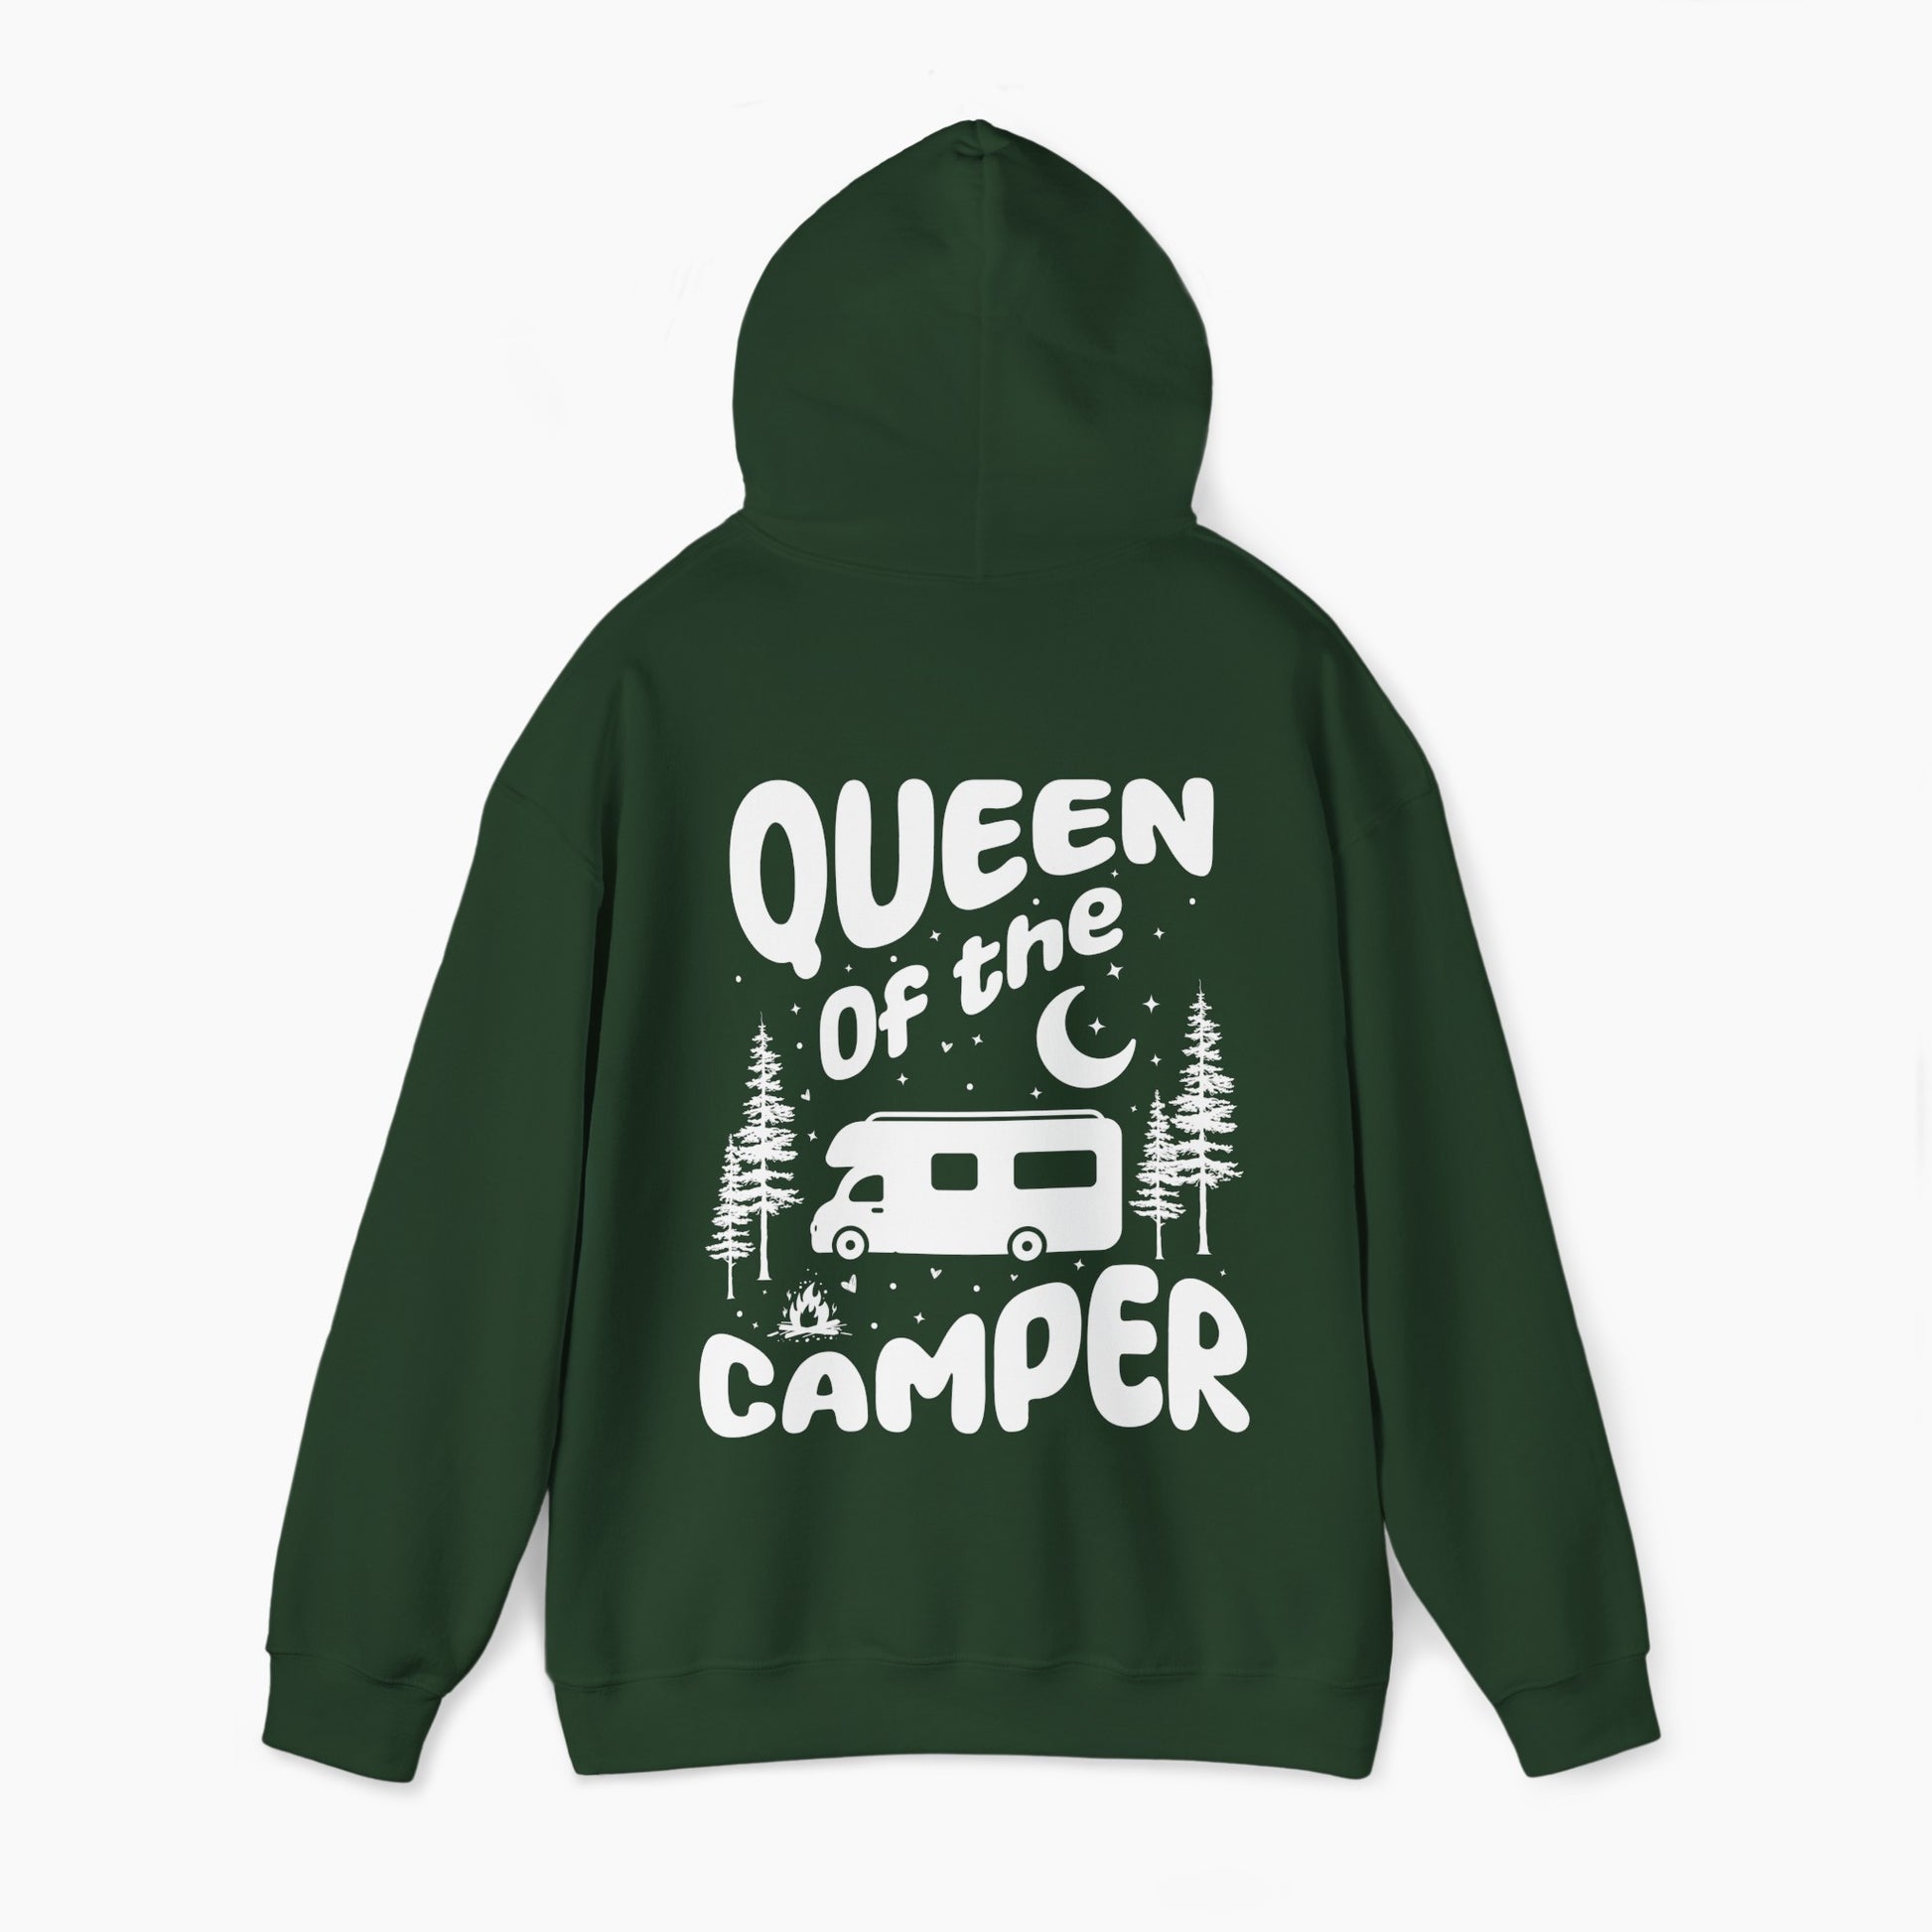 Back of a green hoodie with the text 'Queen of the Camper' surrounded by elements including a camping van, stars, trees, and a campfire, on a plain background.